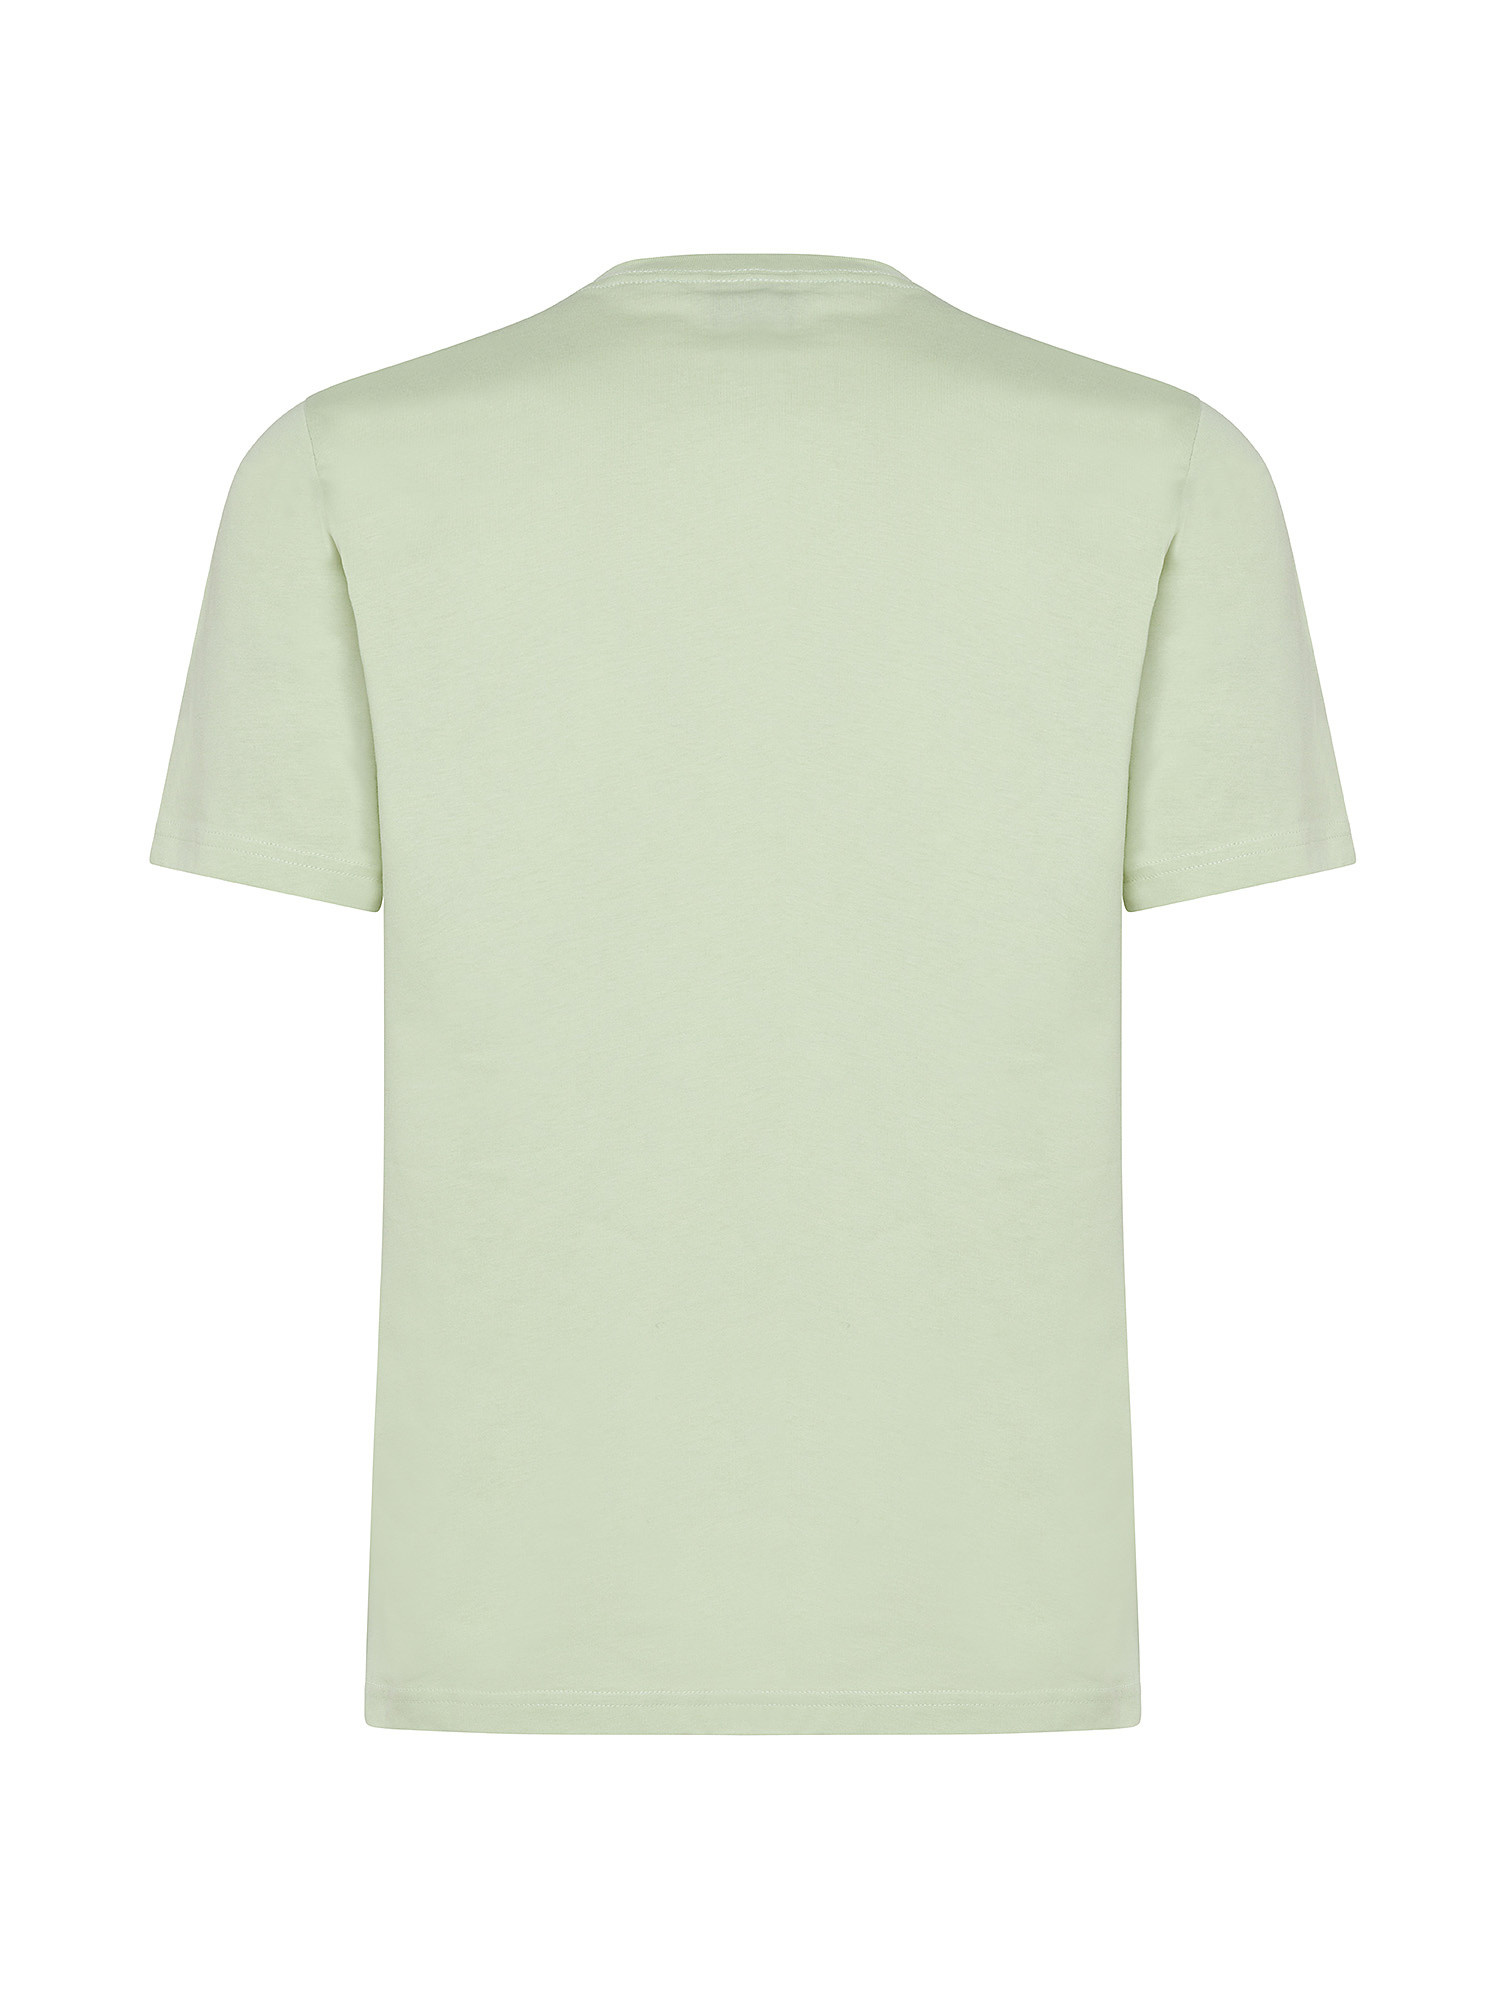 Paul Smith - Cotton T-shirt with skull print, Green, large image number 1